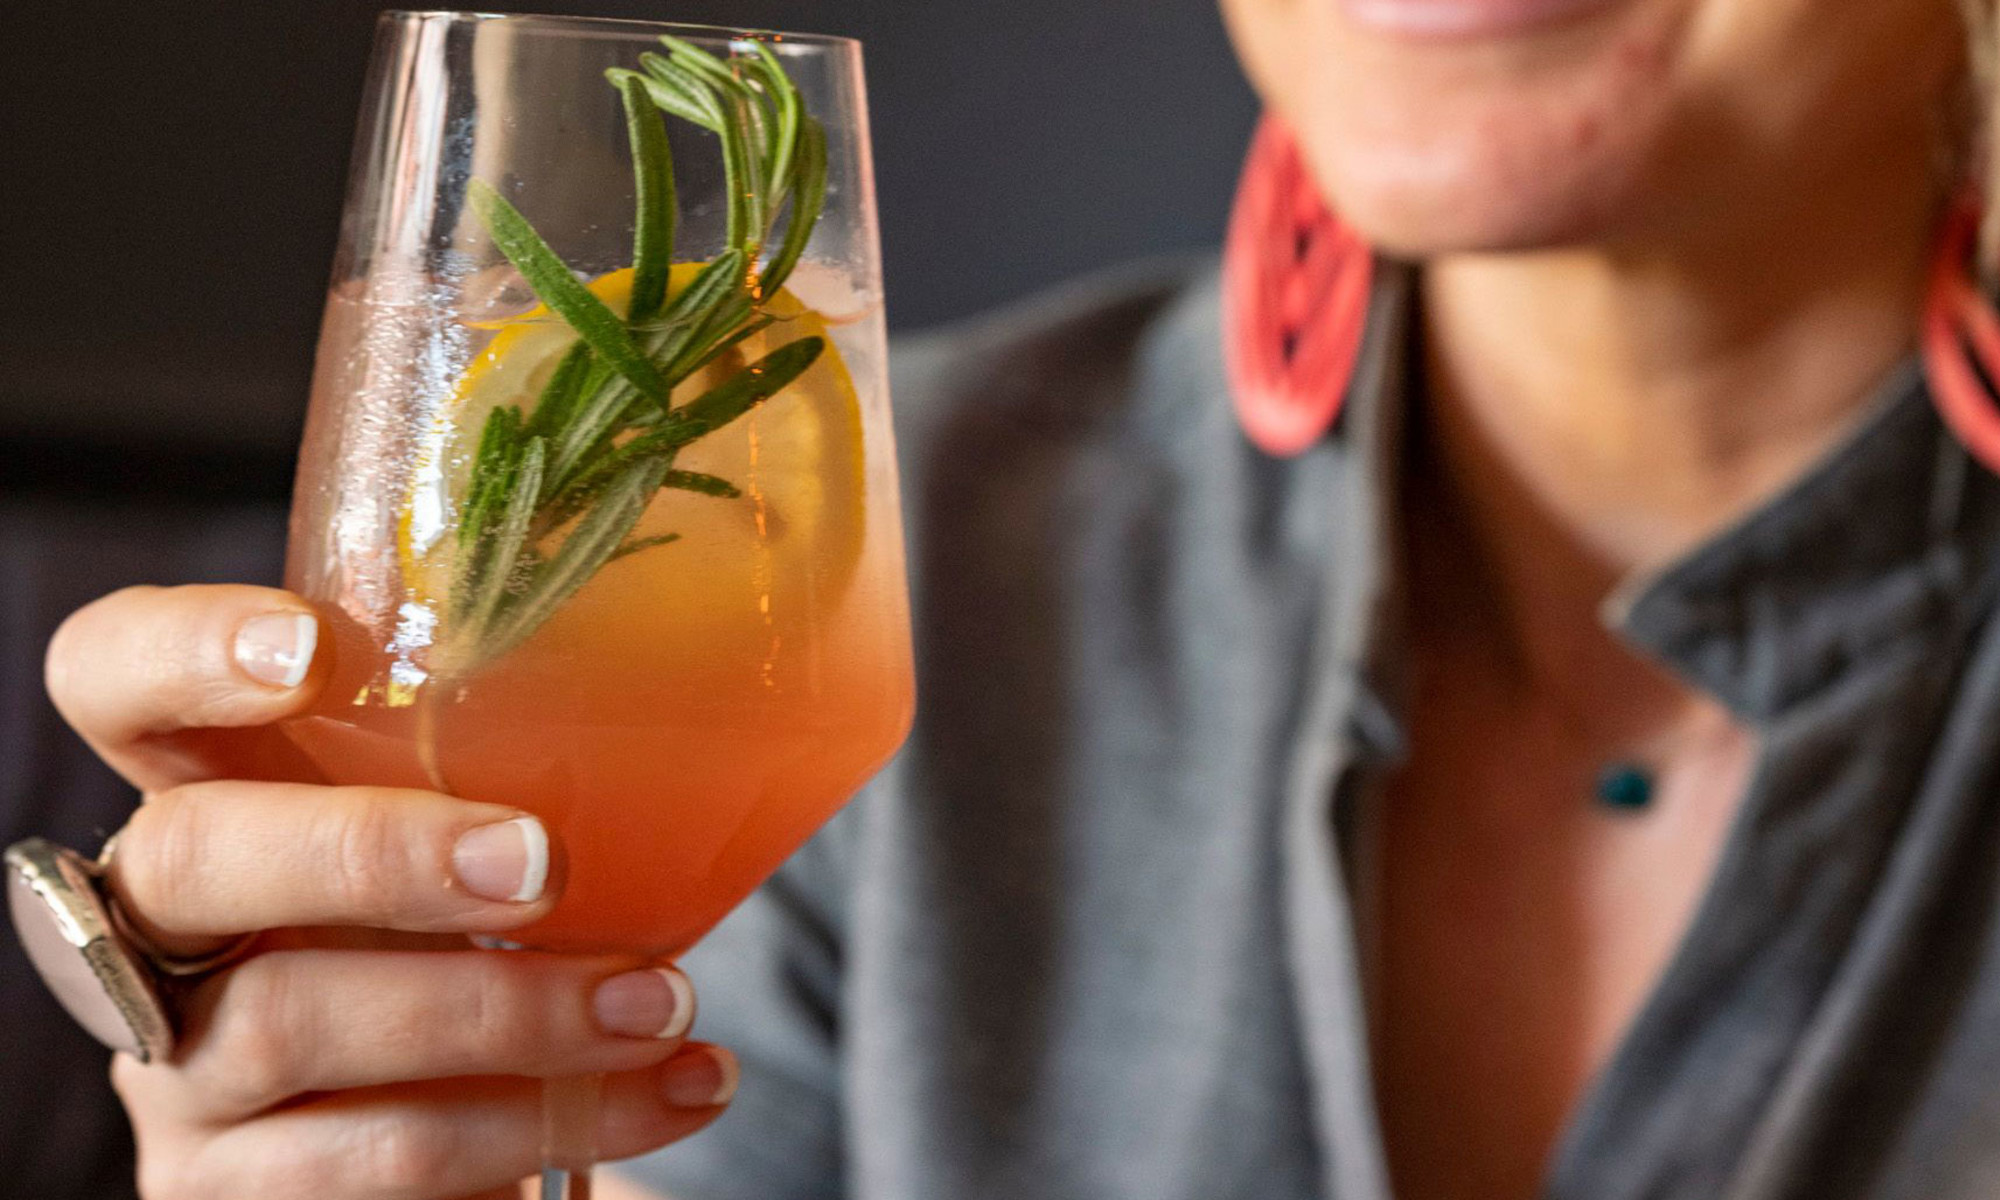 Skip The Hangover With This Zero Proof Pineapple Mocktail